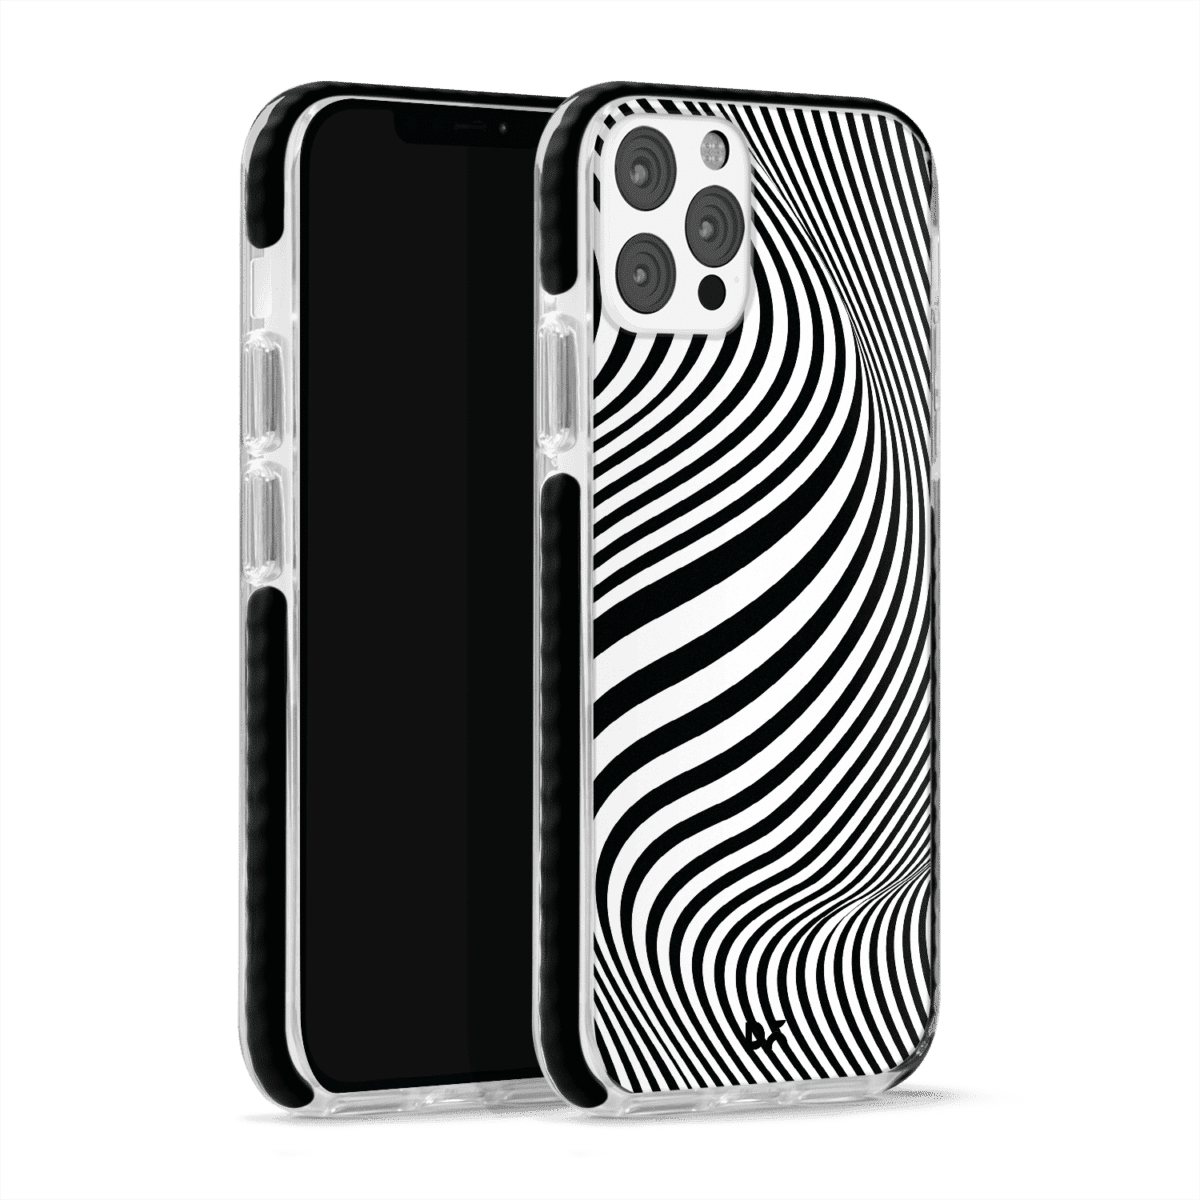 Zebra Stride Case Cover for Apple iPhone 12 Pro and 12 Pro Max with great design and shock proof | Klippik | Online Shopping | Kuwait UAE Saudi